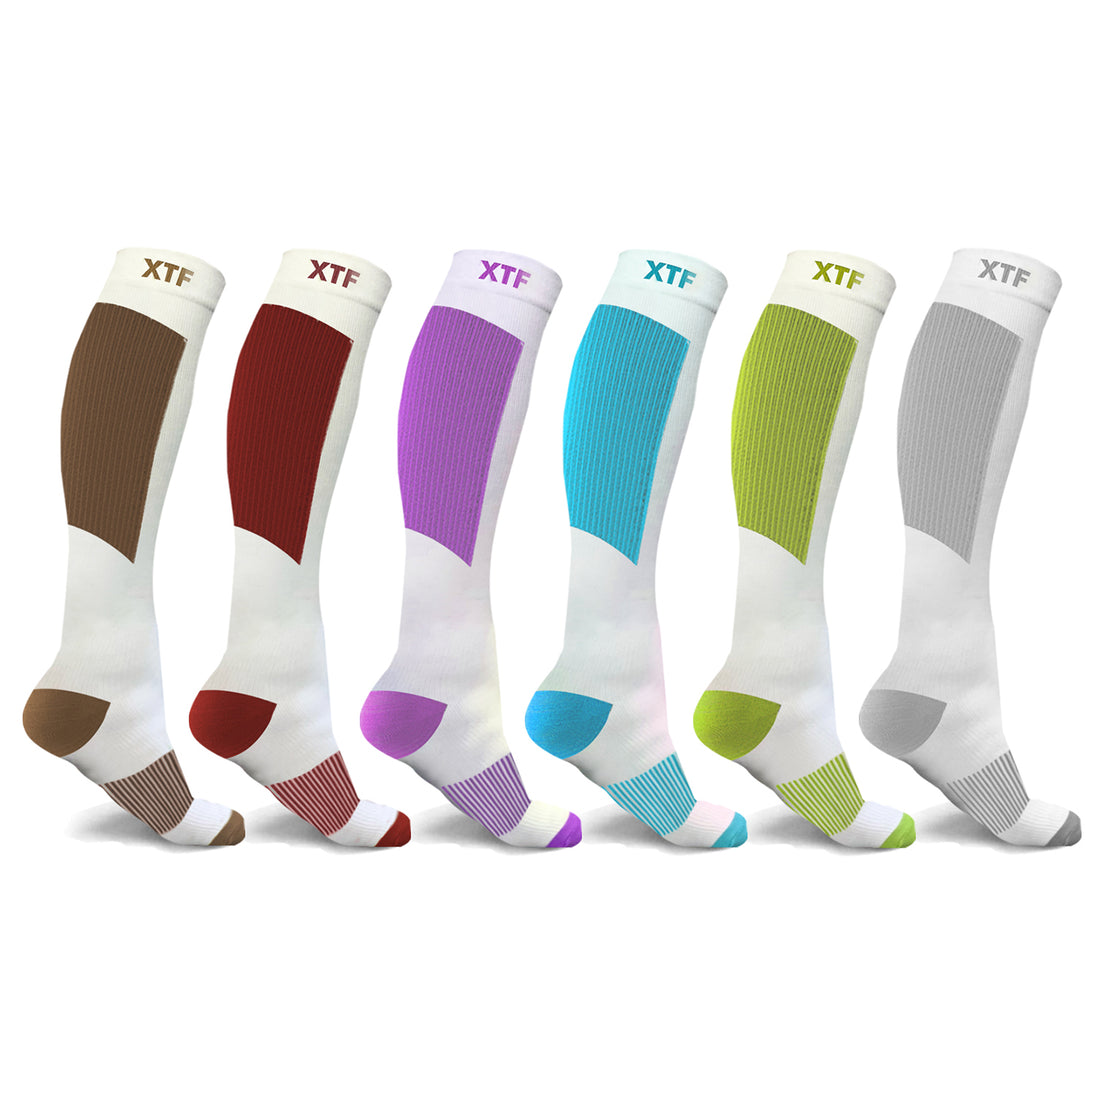 Copper-Infused Graduated Socks (6-Pairs)